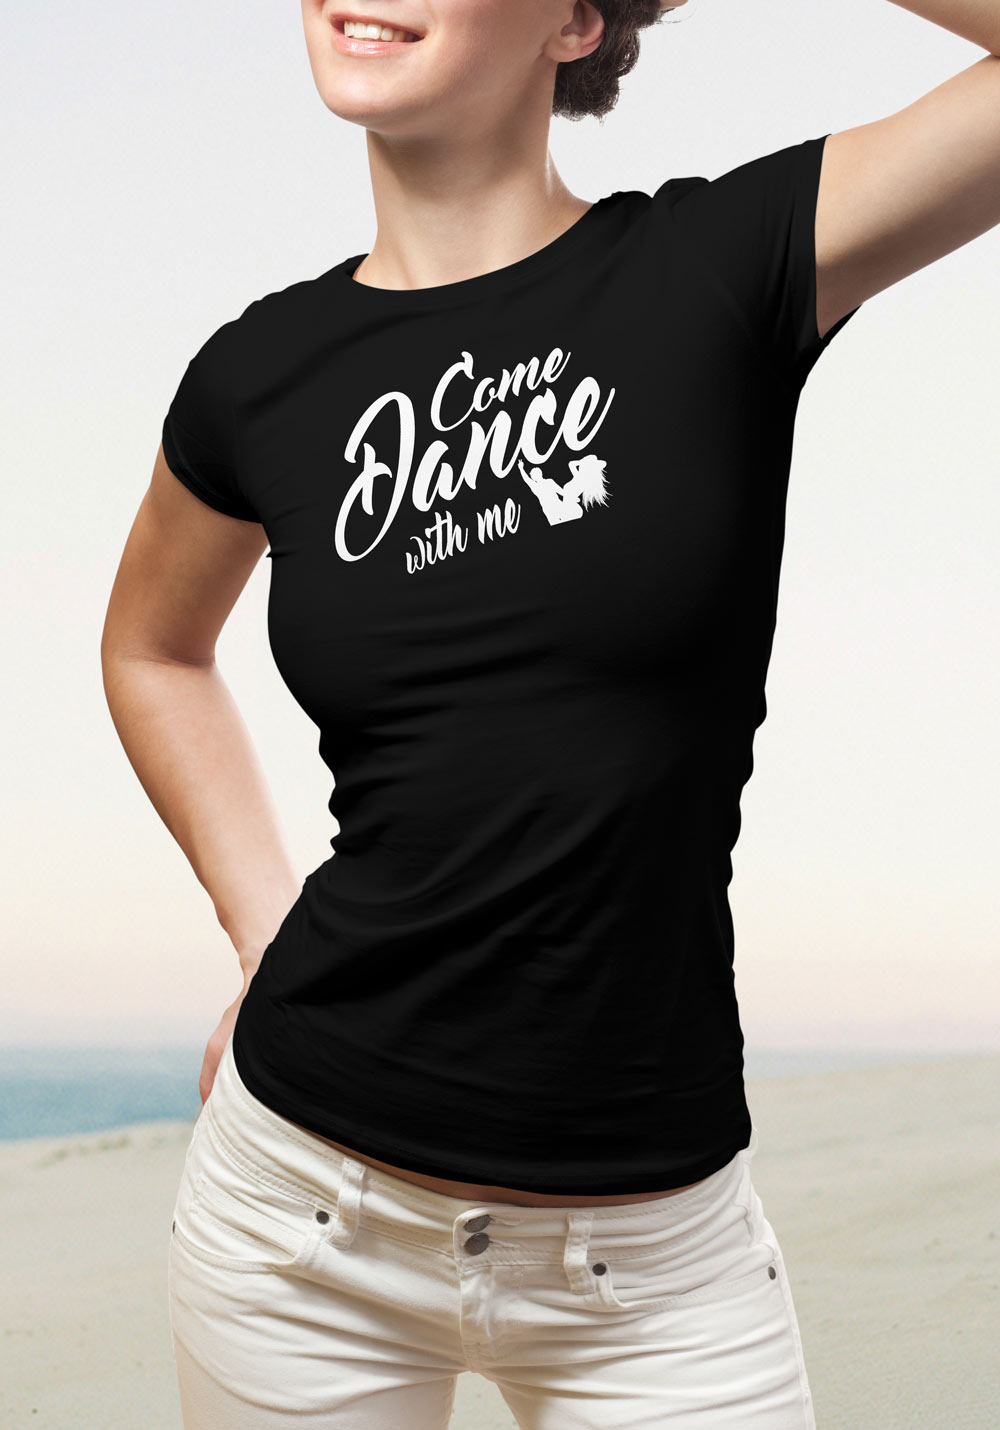 Woman wearing Zouk T-shirt decorated with unique "Come Dance with me" design in black crew neck style